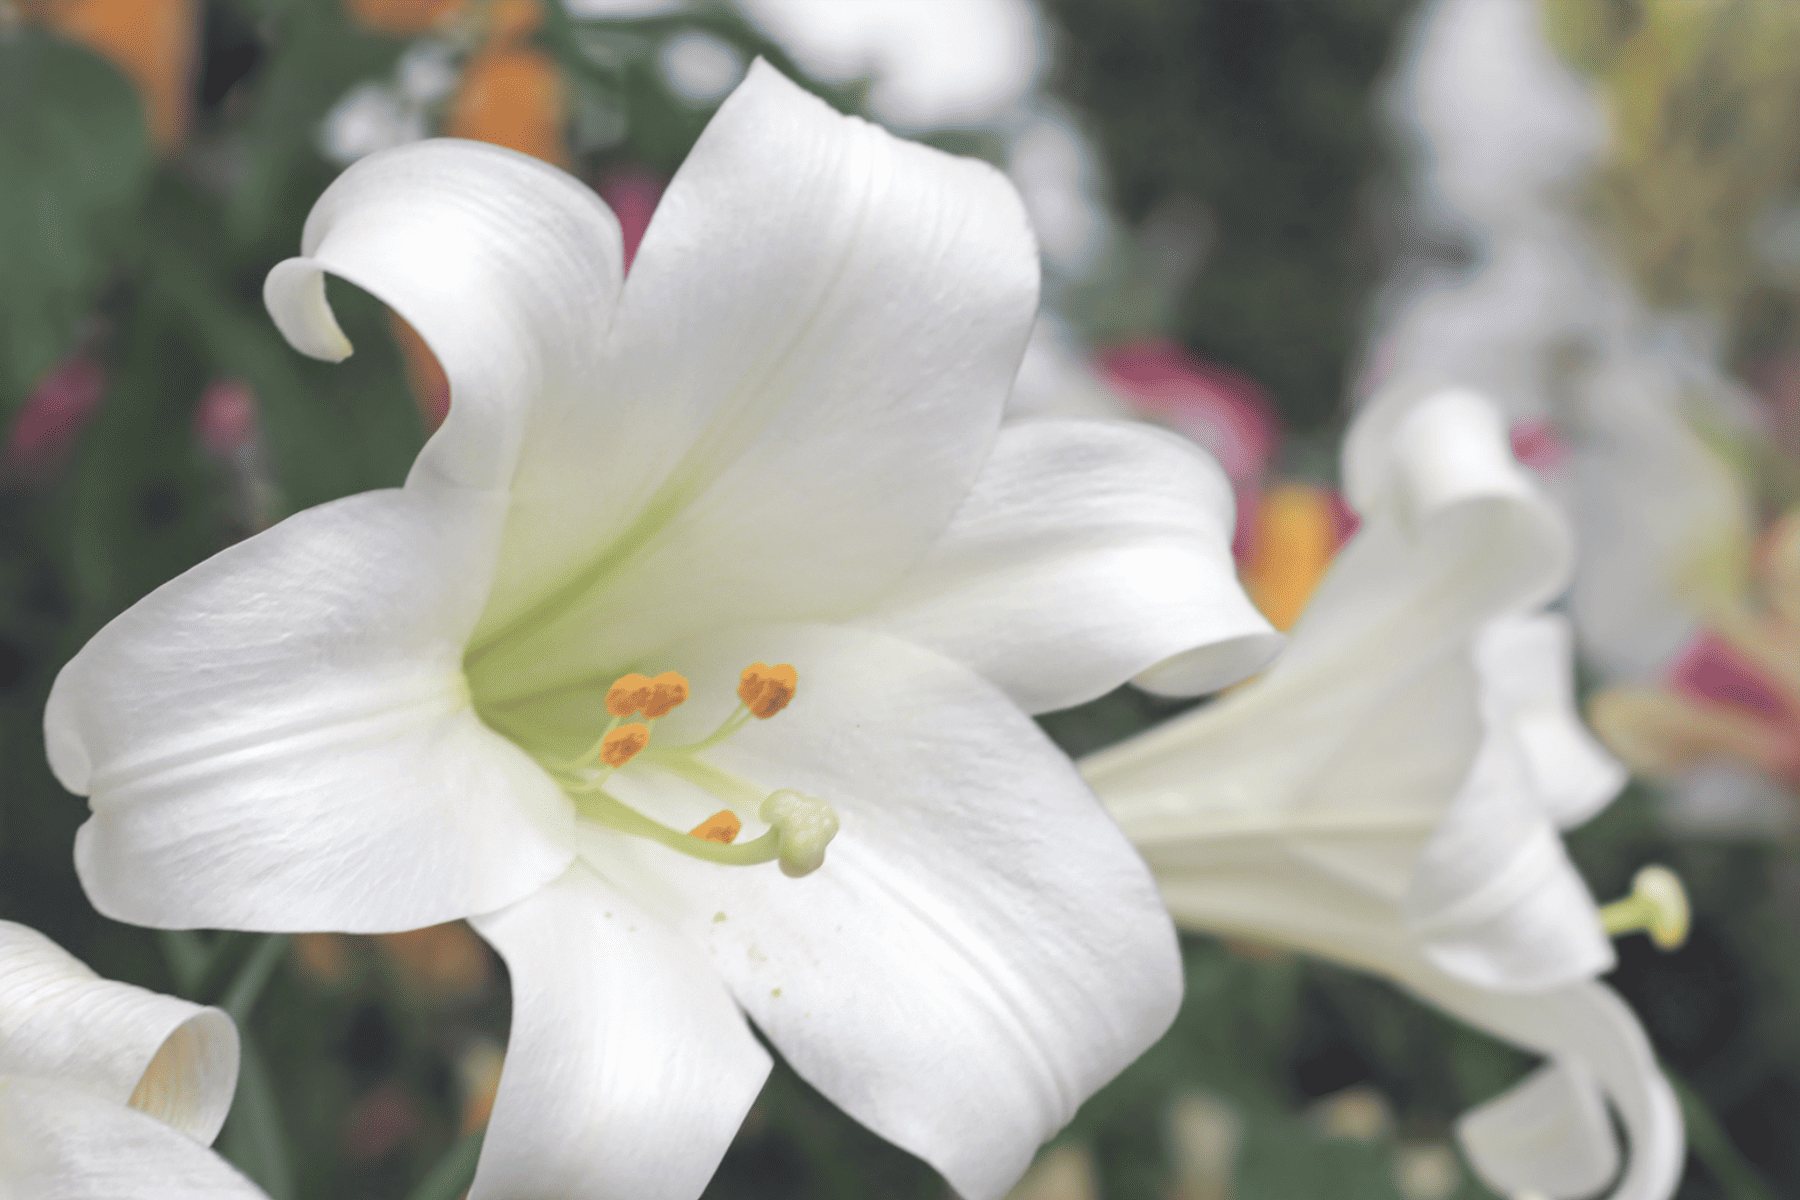 A close up of an Easter lily.